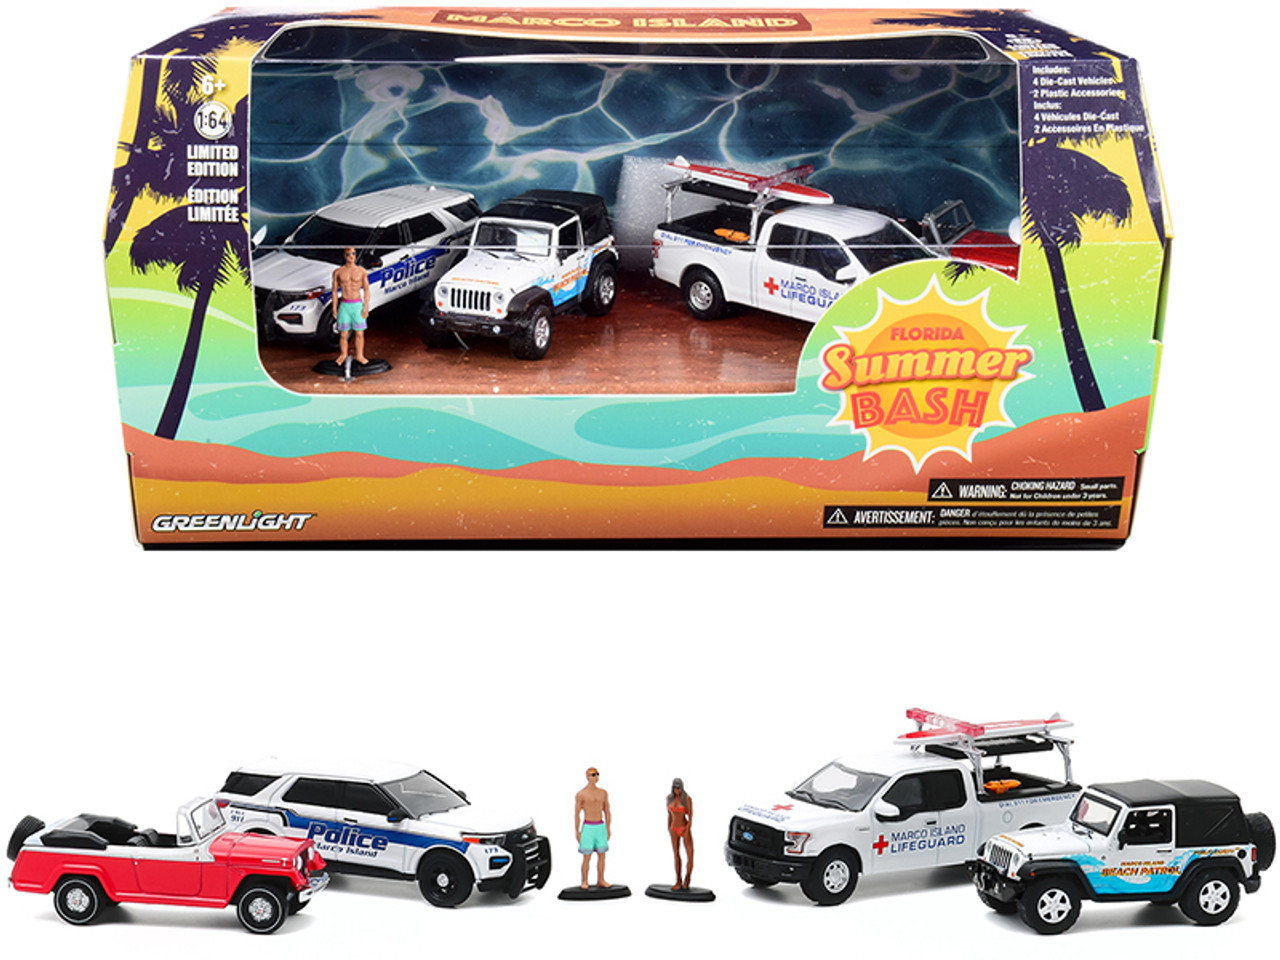 Marco Island "Florida Summer Bash" 6 piece Diorama Set (4 Cars and 2 Figurines) 1/64 Diecast Model Cars by Greenlight